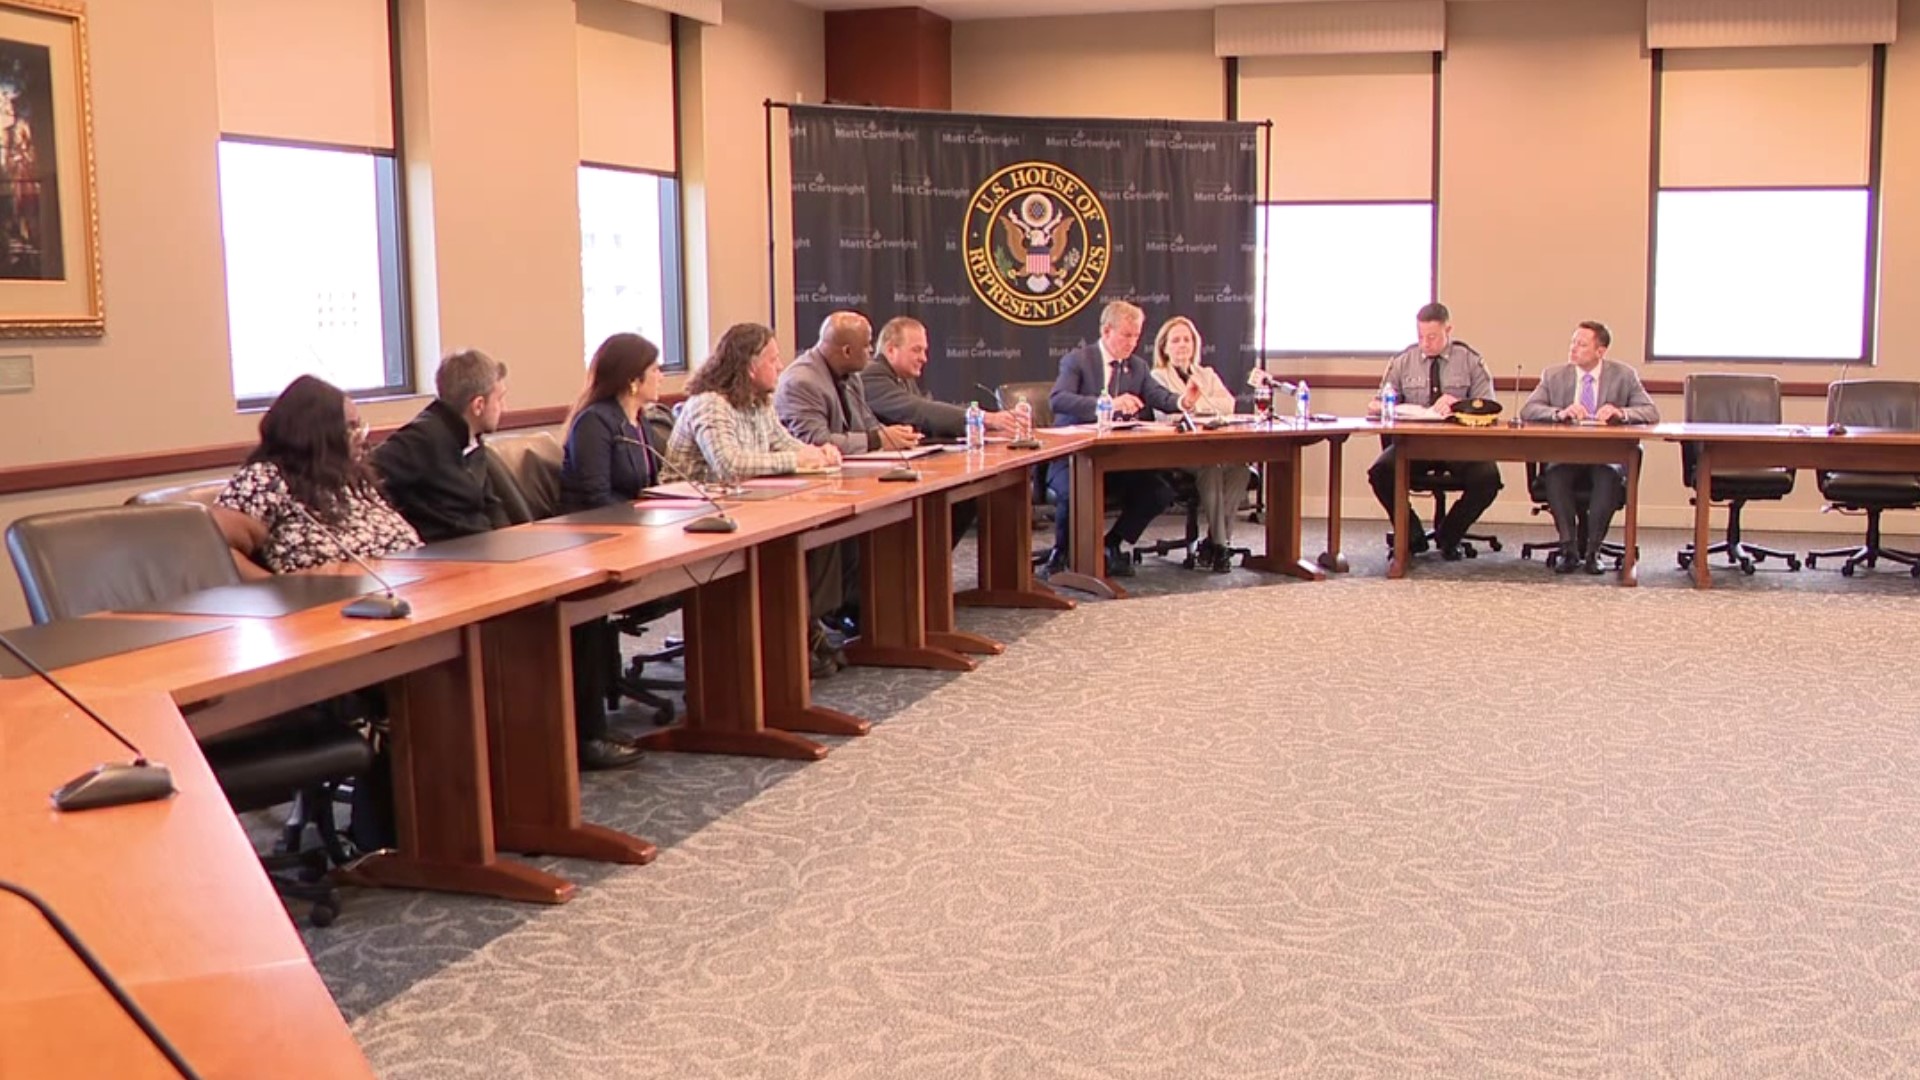 Officials in Scranton had an important conversation about gang violence in the city.